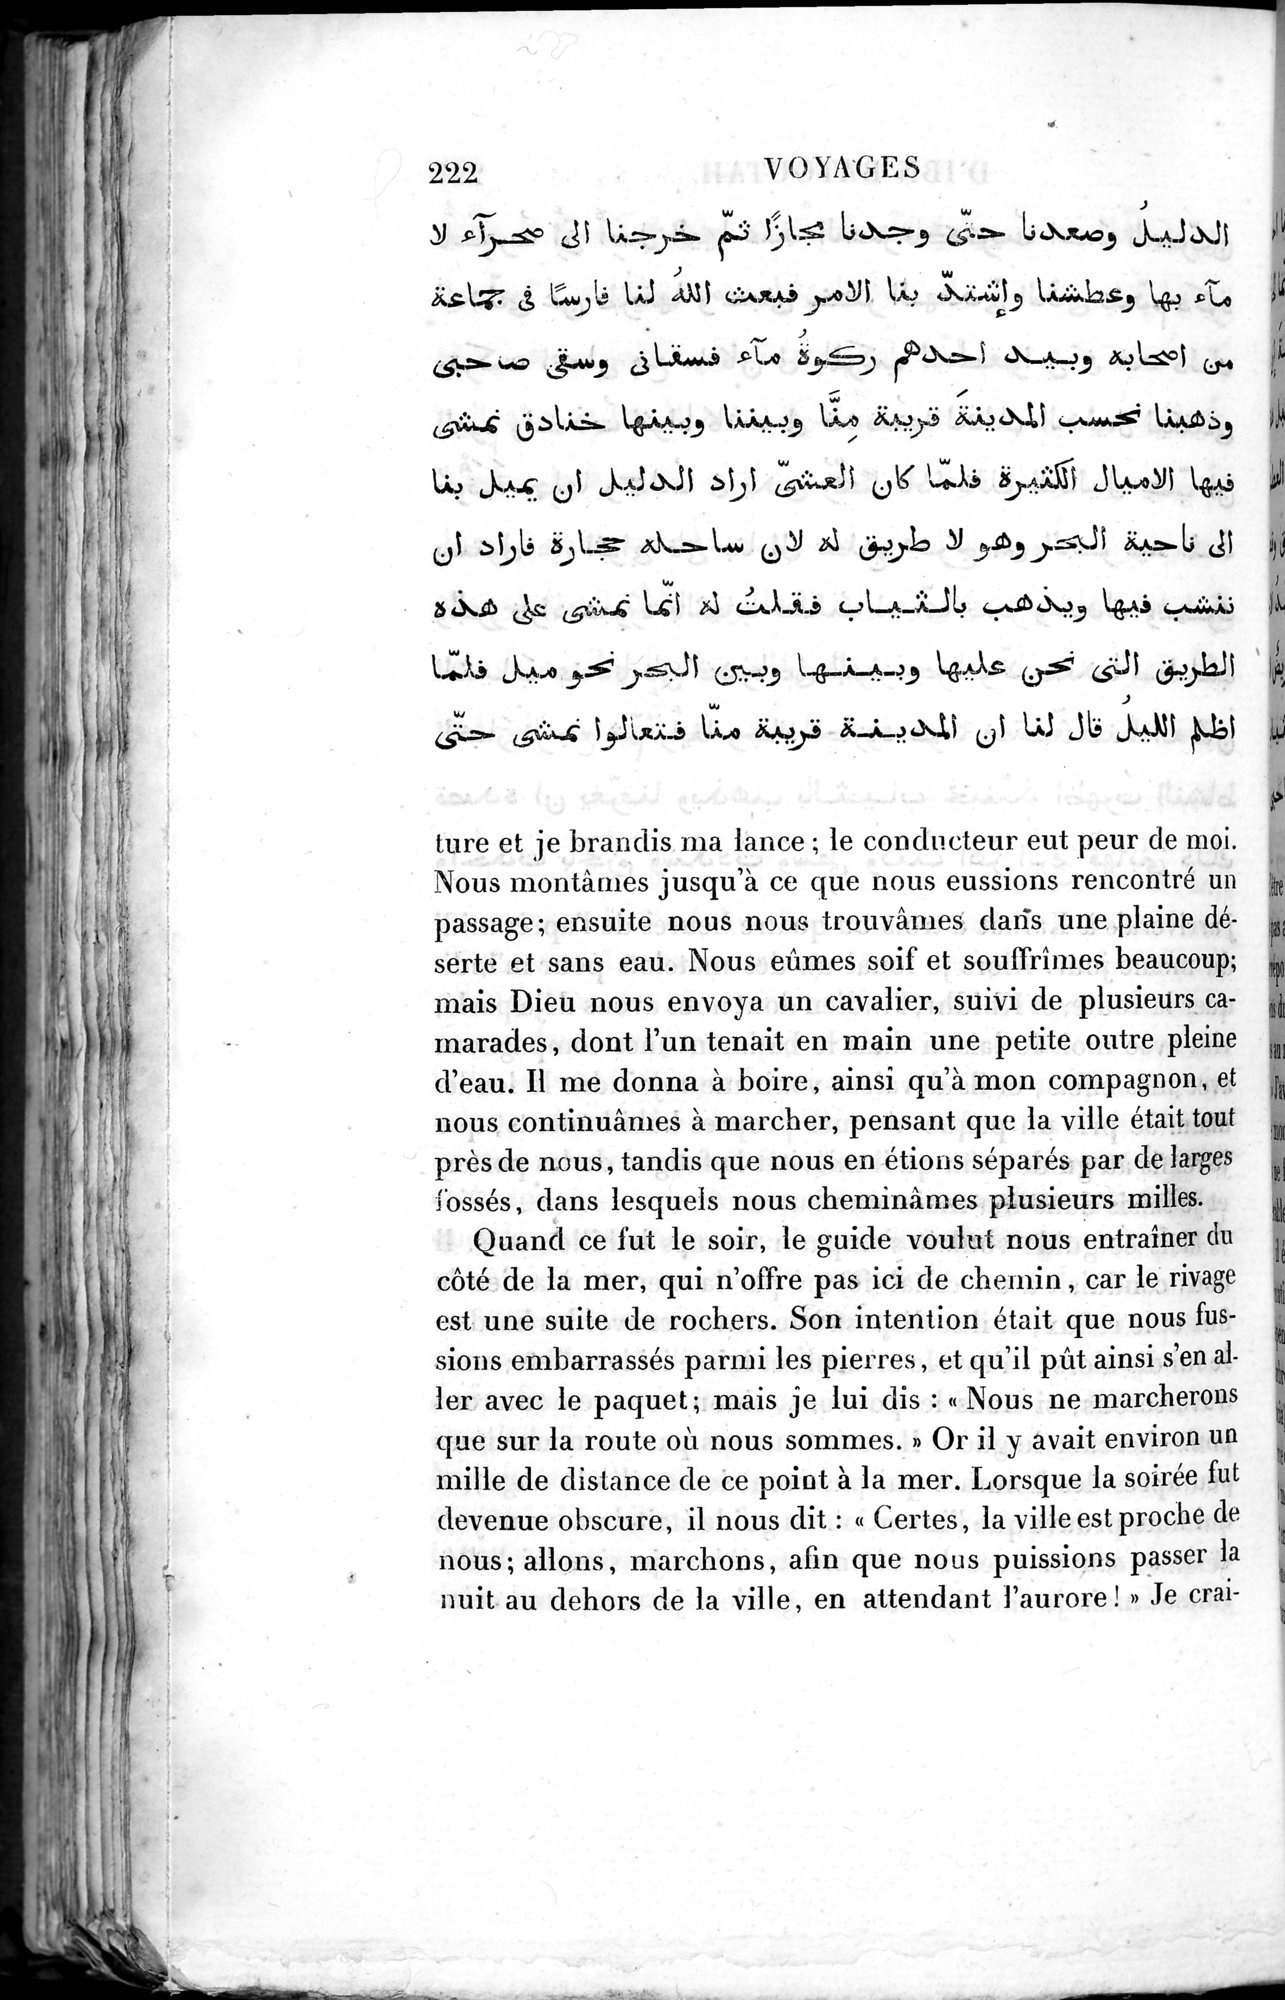 Voyages d'Ibn Batoutah : vol.2 / Page 250 (Grayscale High Resolution Image)